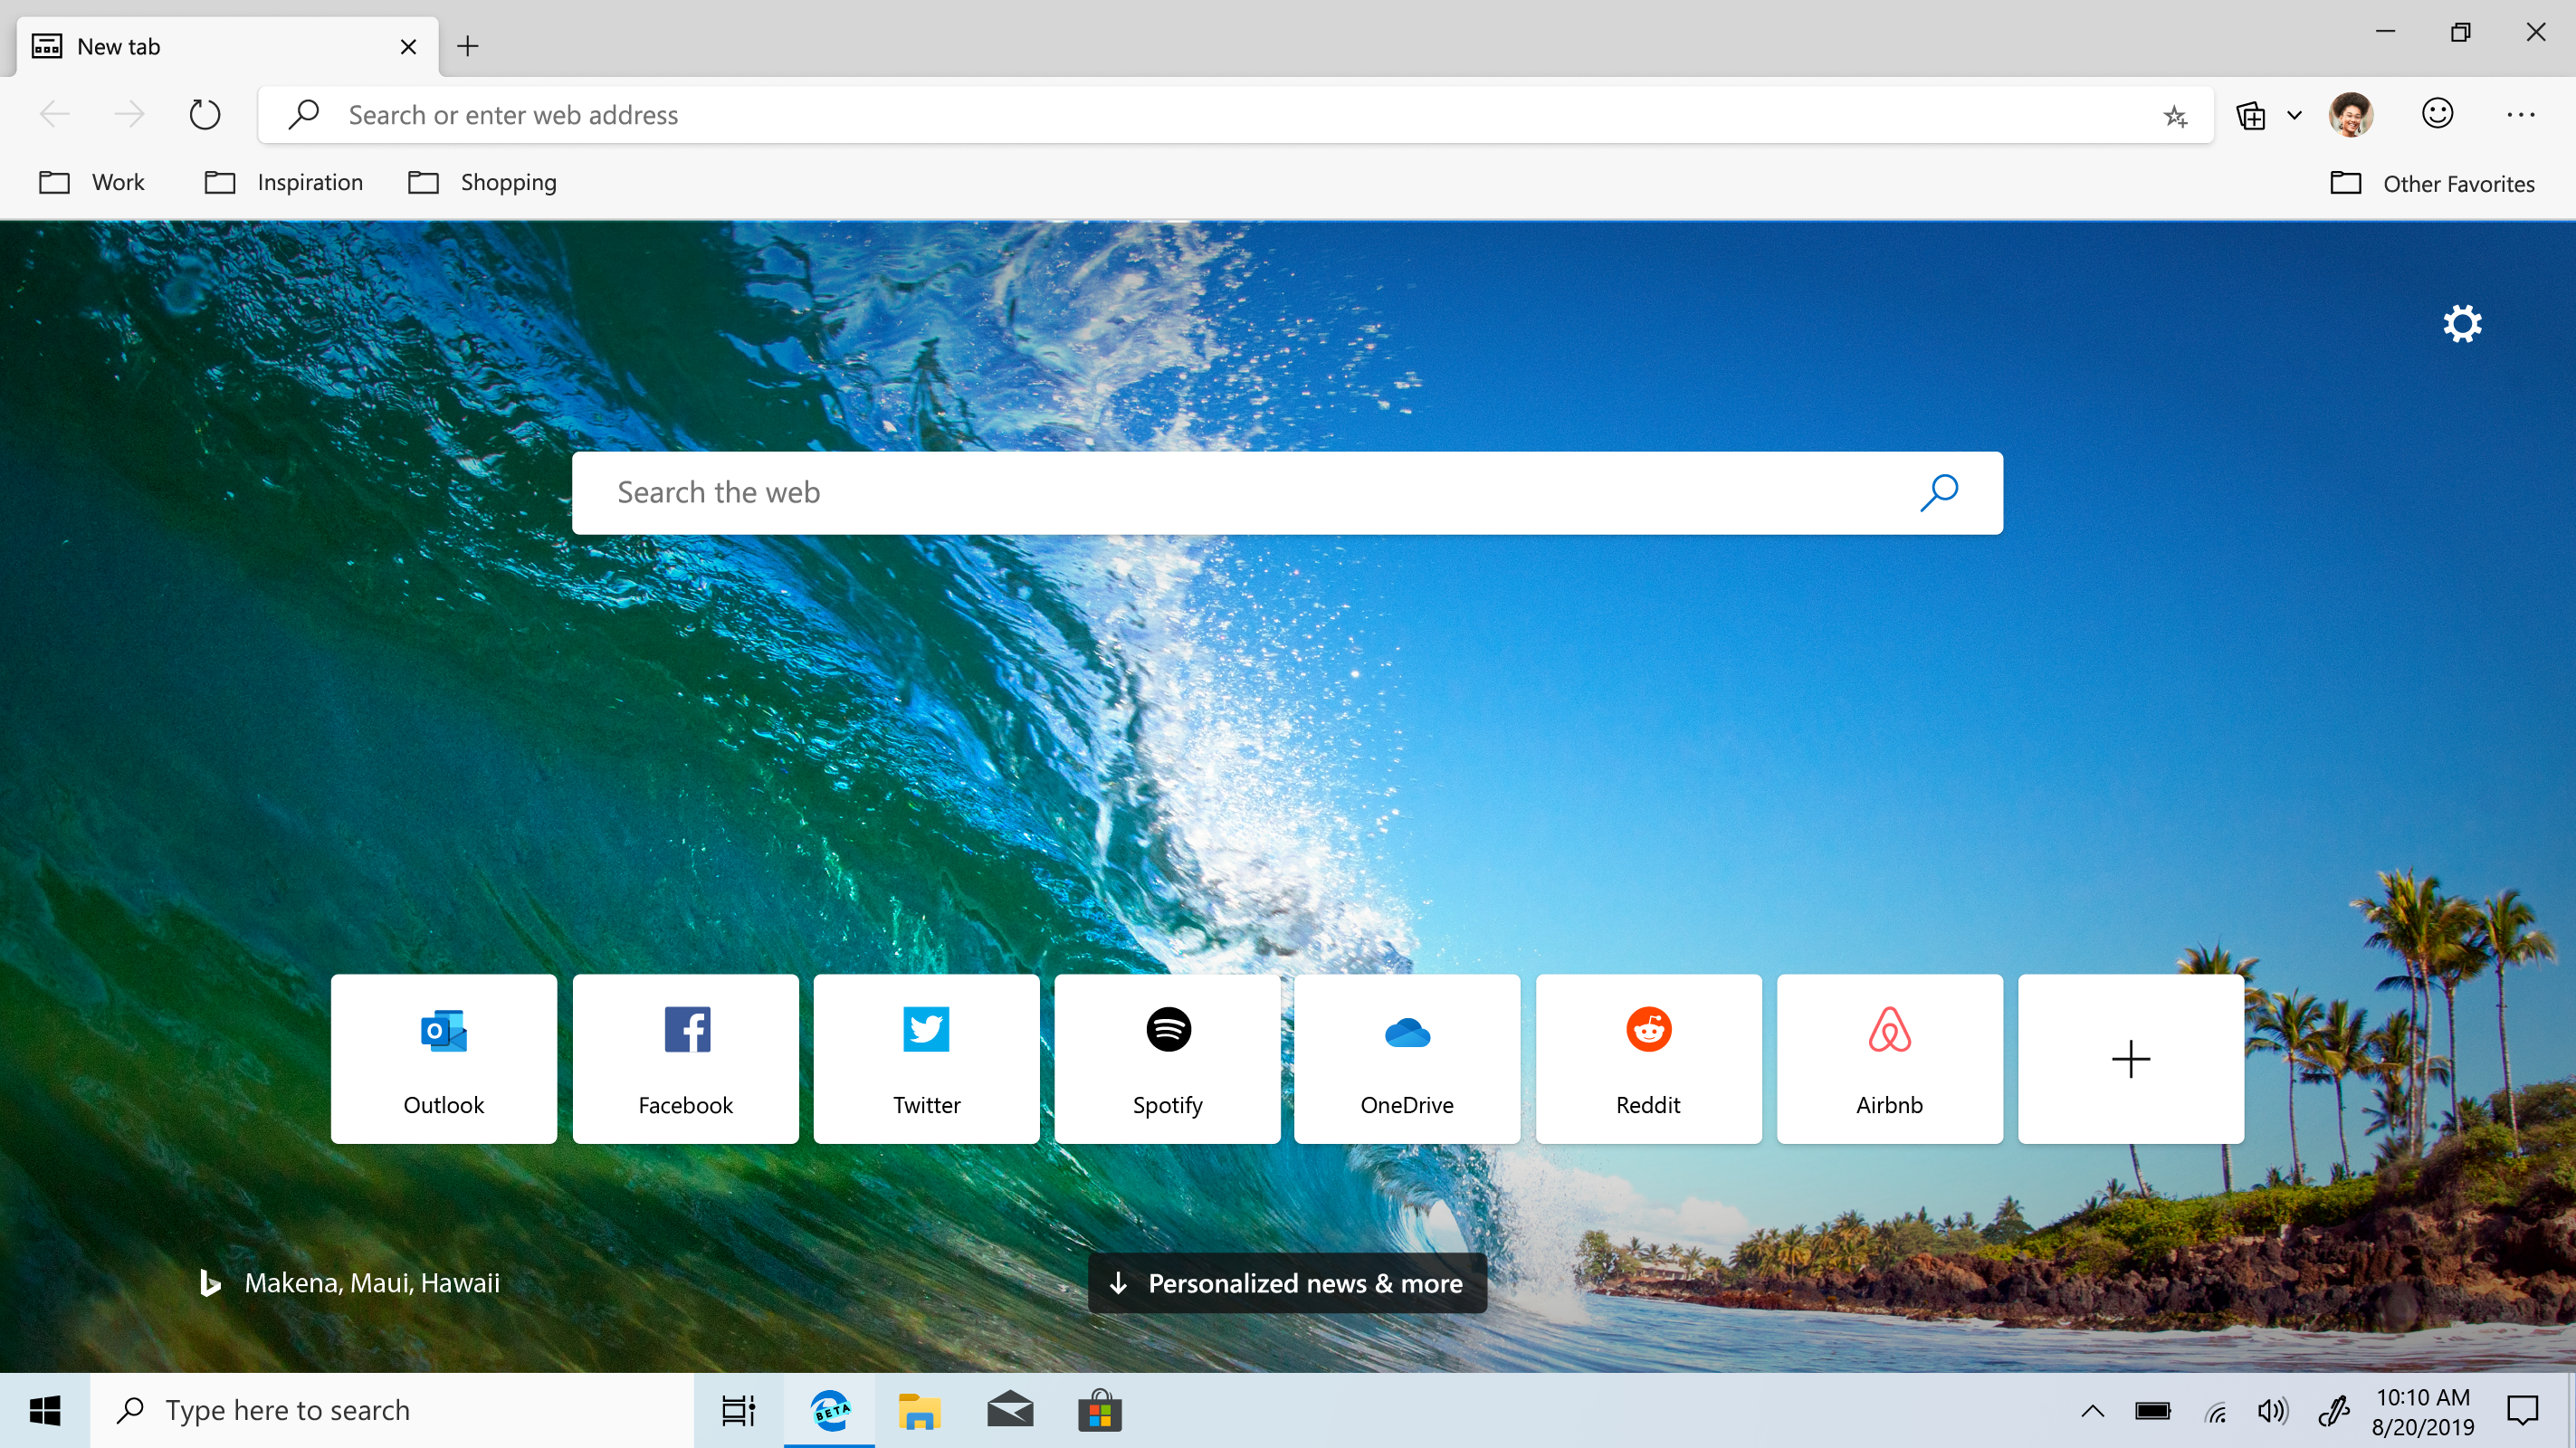 Introducing Microsoft Edge Beta: Be one of the first to try it now